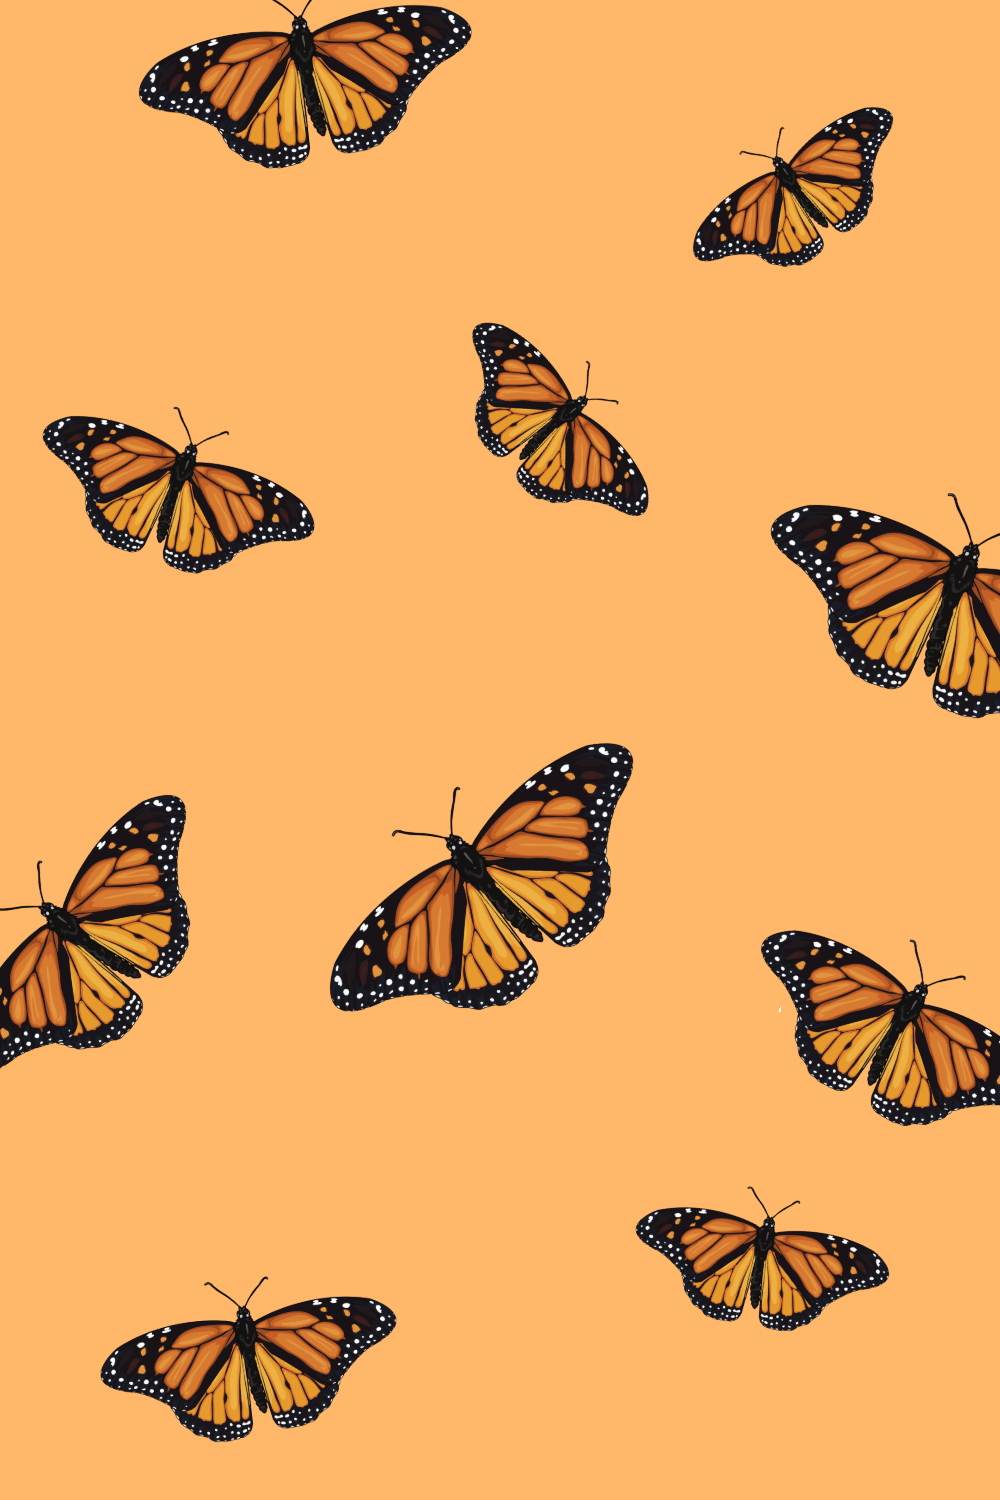 Wallpaper of a orange background with black and orange butterflies - Butterfly